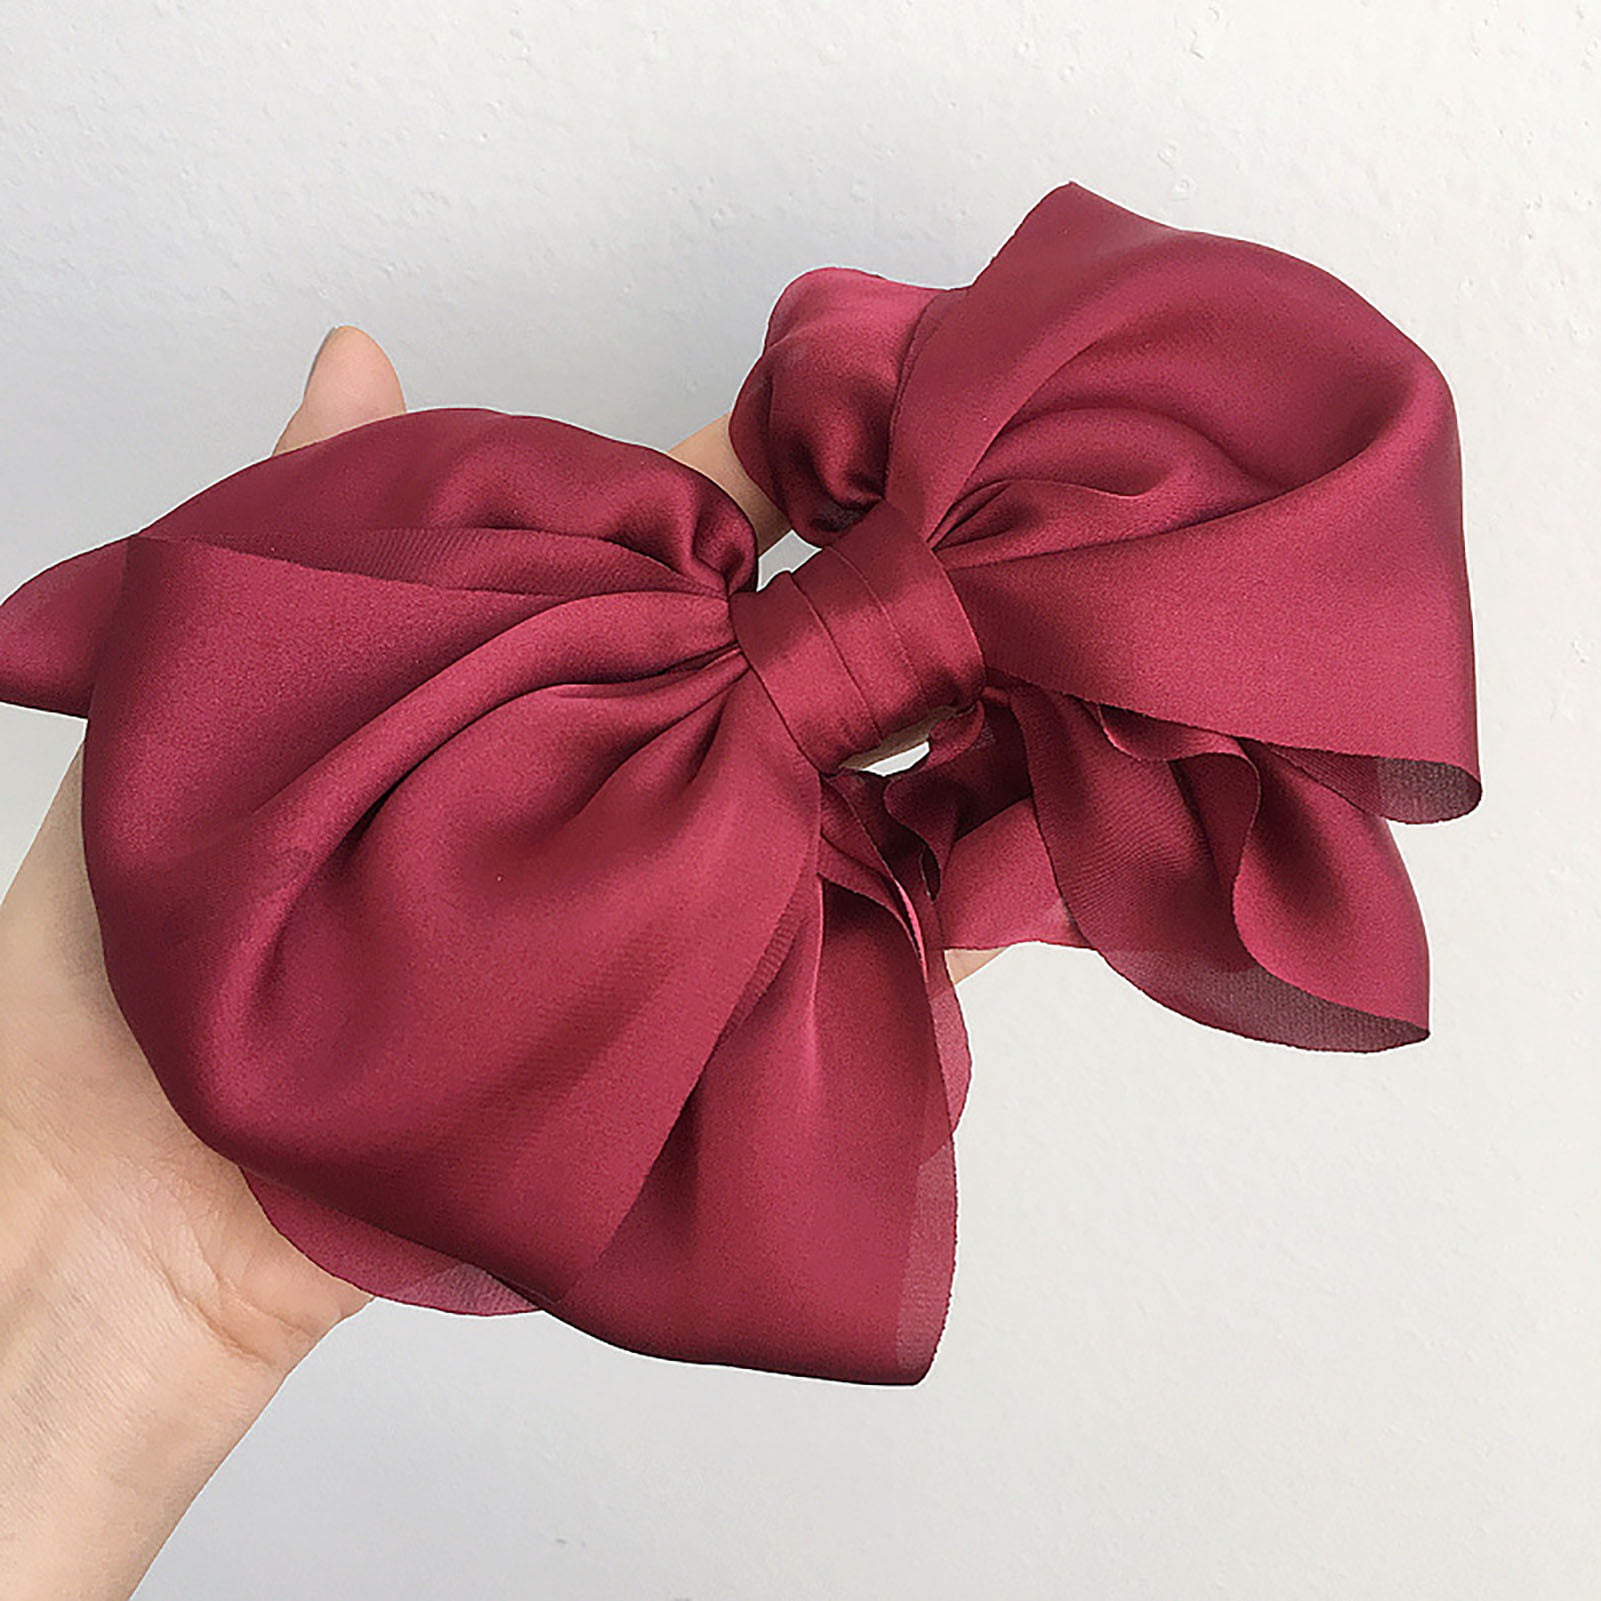 Louis Vuitton Ribbon Bow All Inclusive Handmade Hair Accessories medium  size into Hair Clips. Price : 190THB/ piece - All Ribbons are…